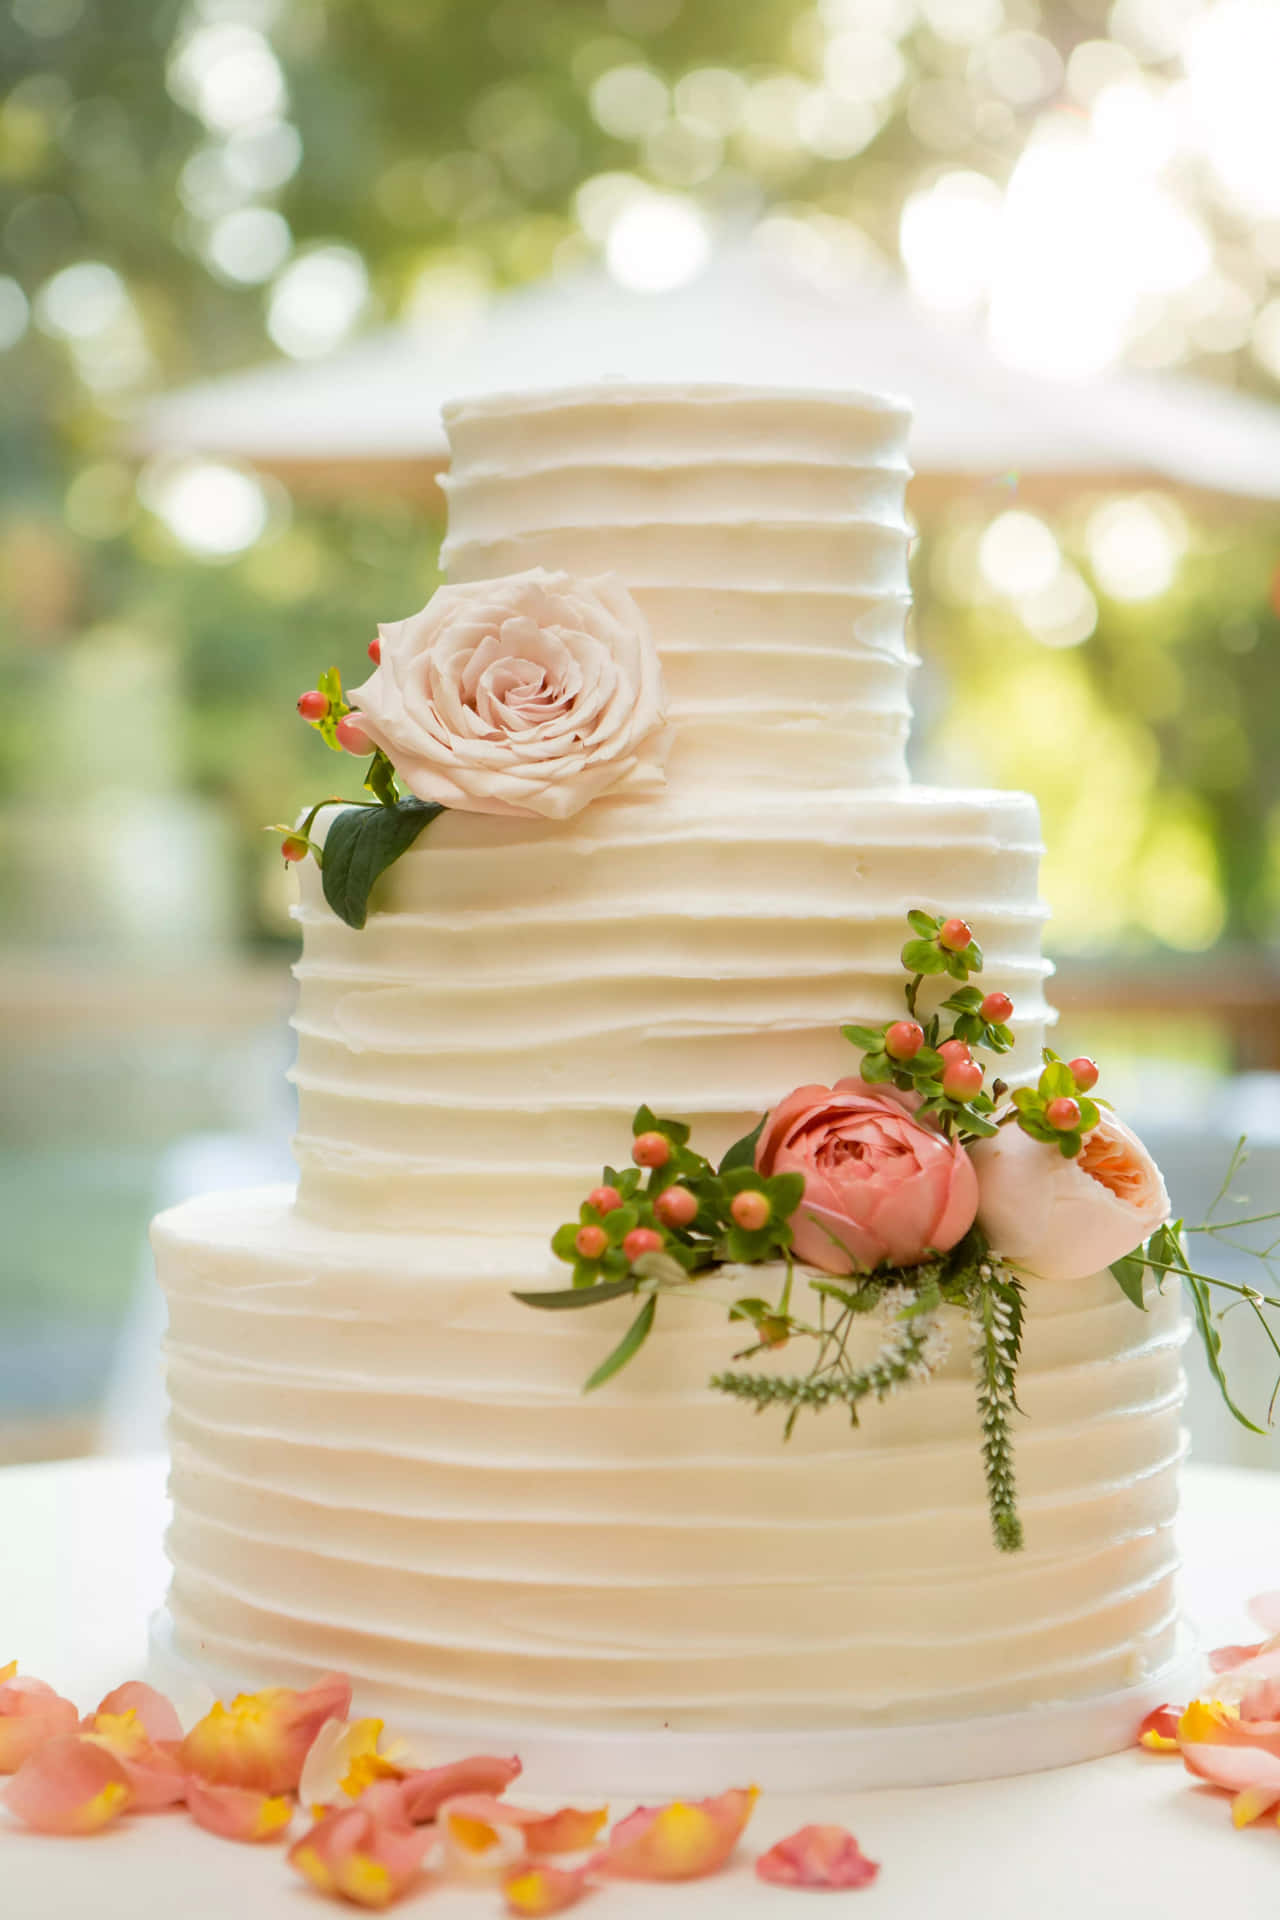 A White Wedding Cake With Flowers On Top